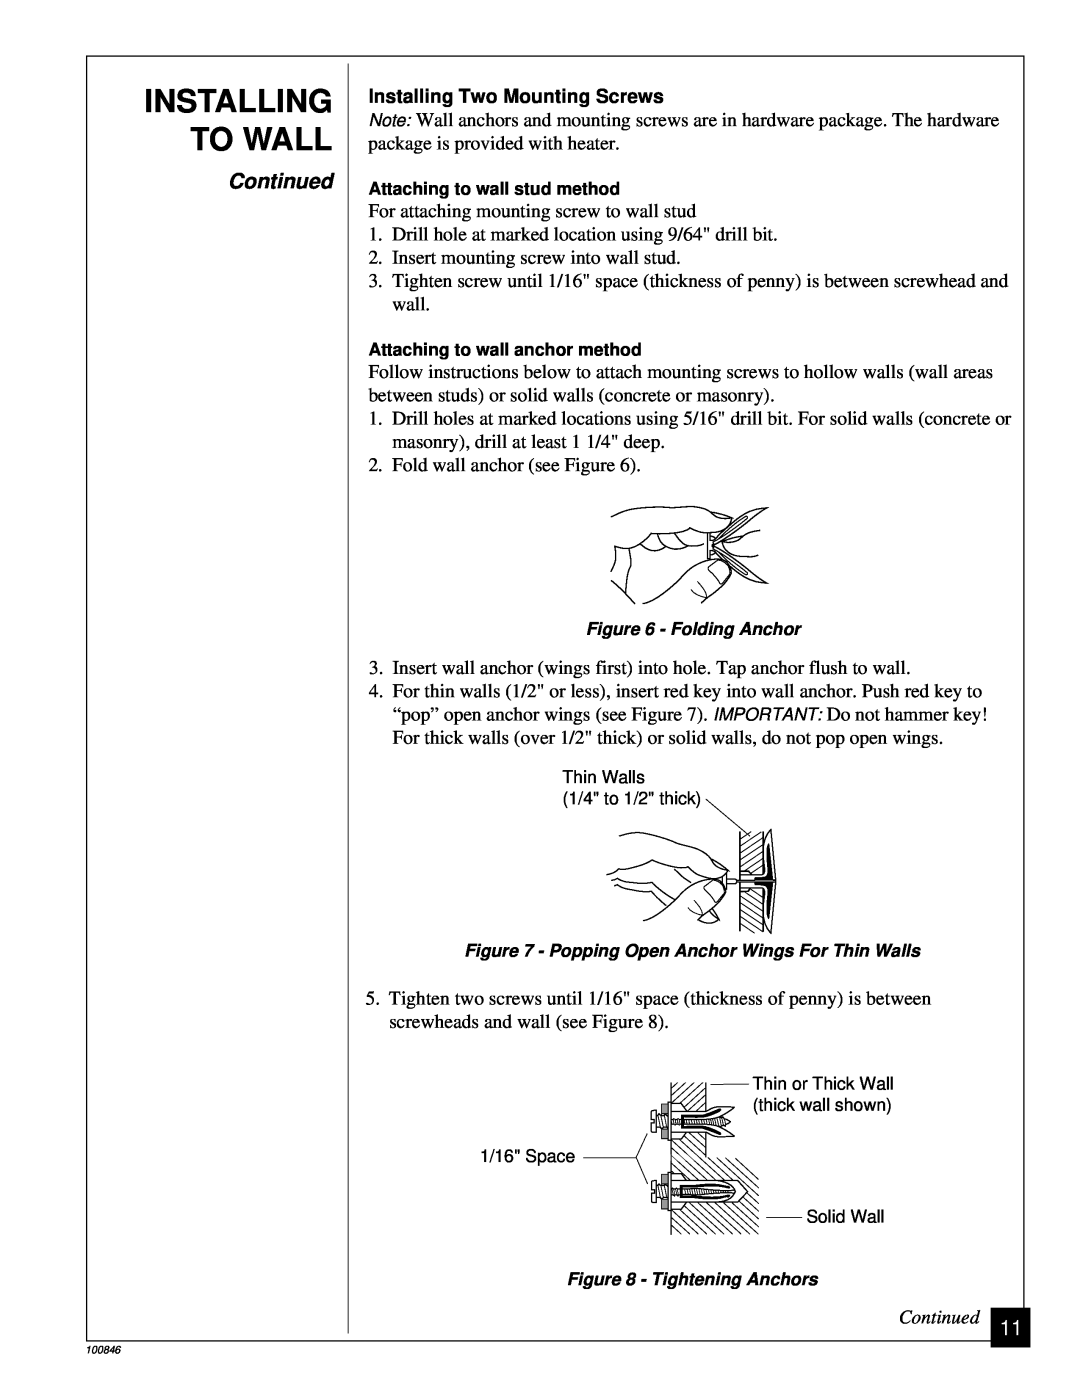 Desa CGP11A installation manual To Wall, Continued, Installing Two Mounting Screws 